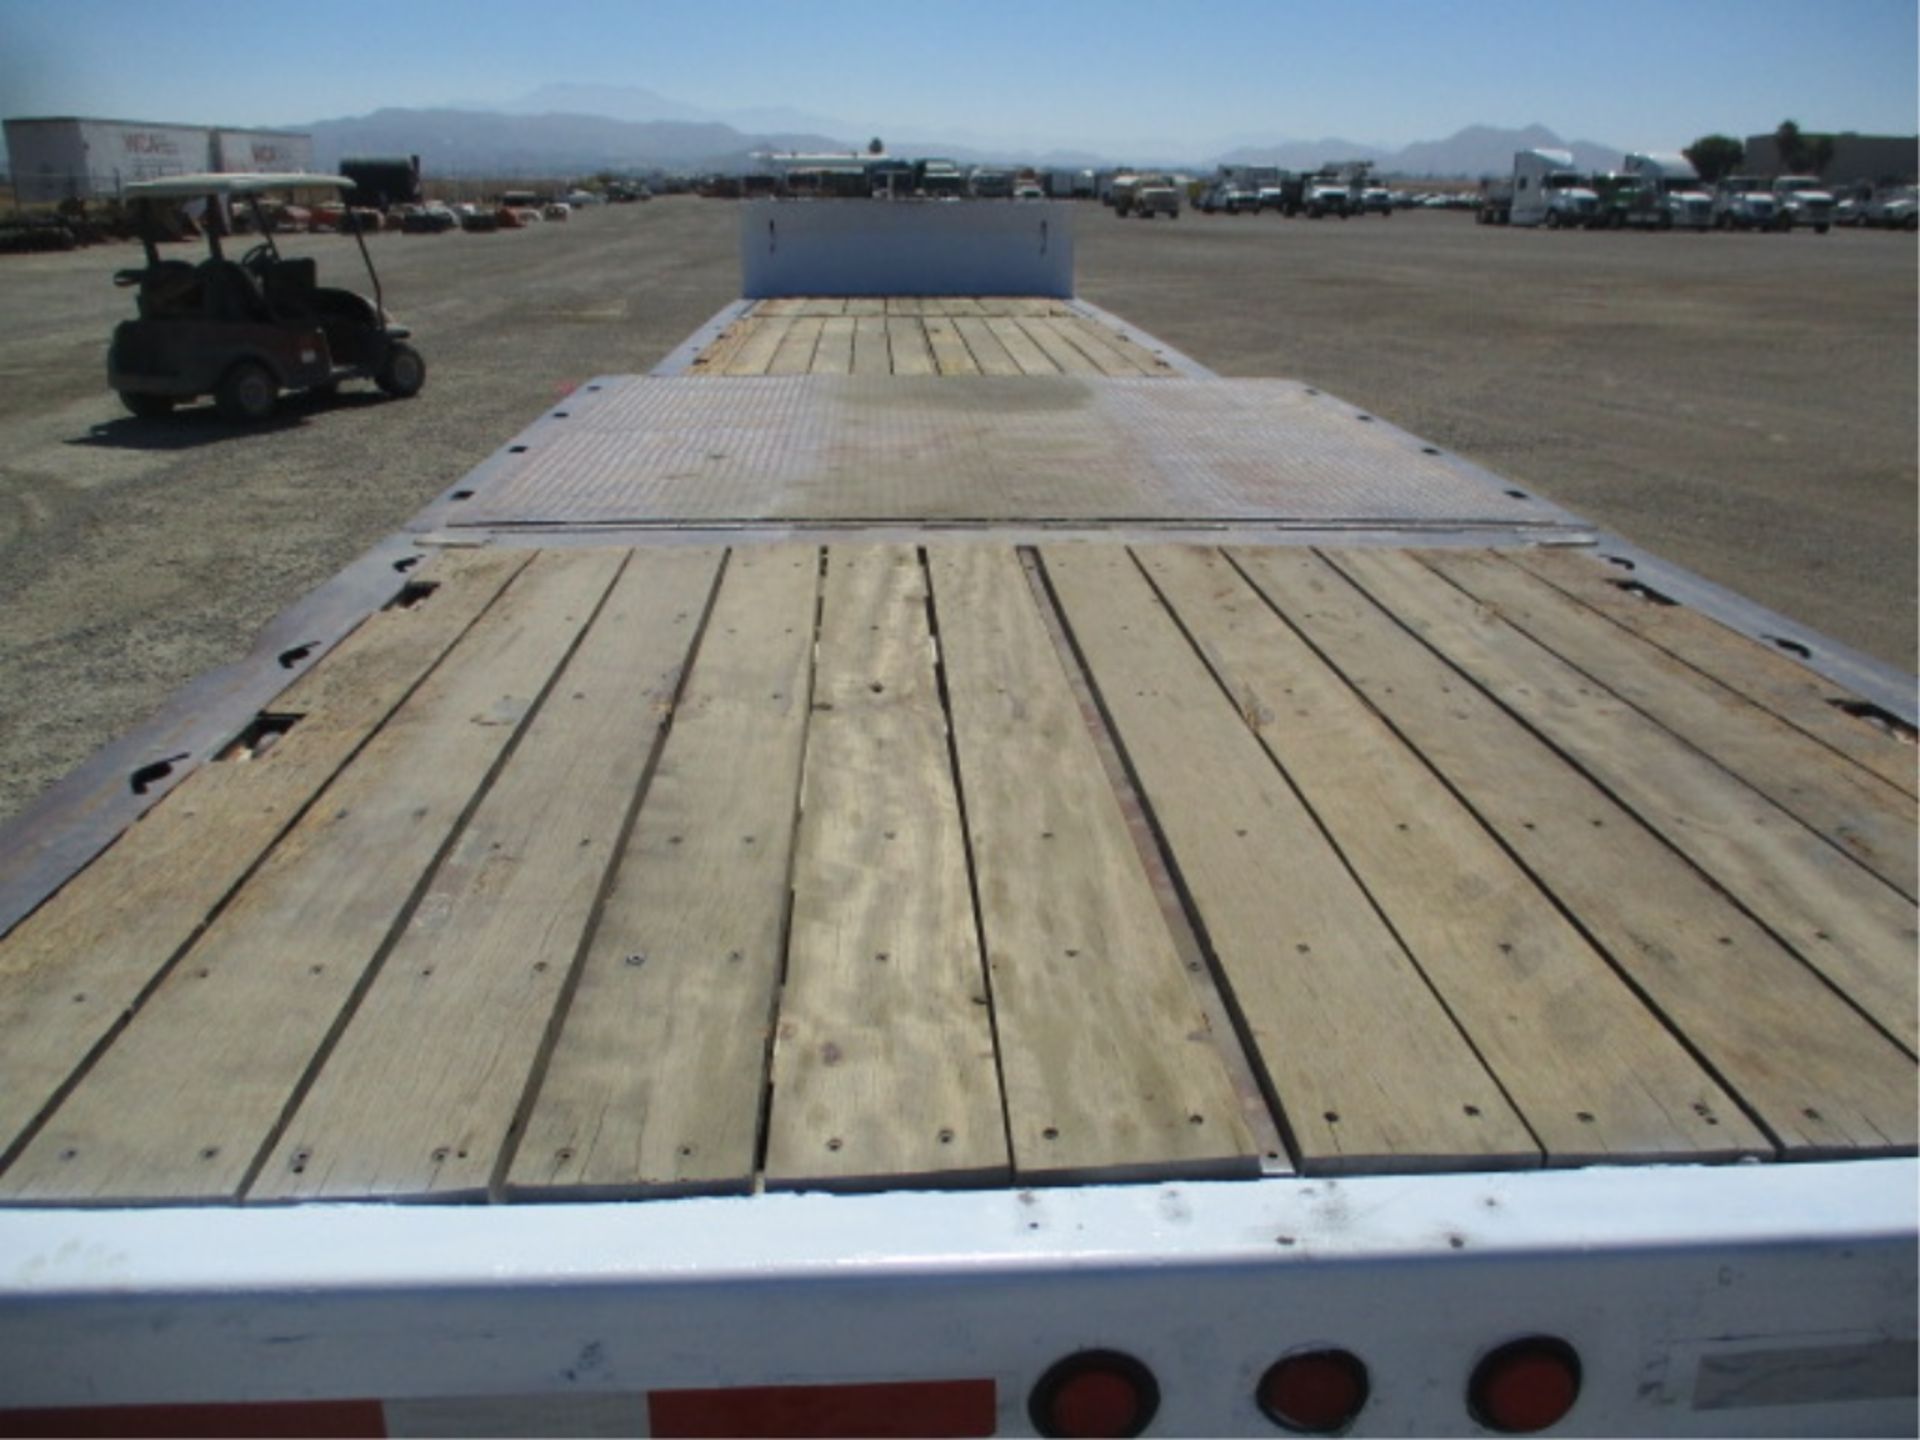 2000 Trail King TK70HT-482 T/A Equipment Trailer, 48', Wood Deck, Hydraulic Dove Tail, 10' Upper - Image 20 of 88